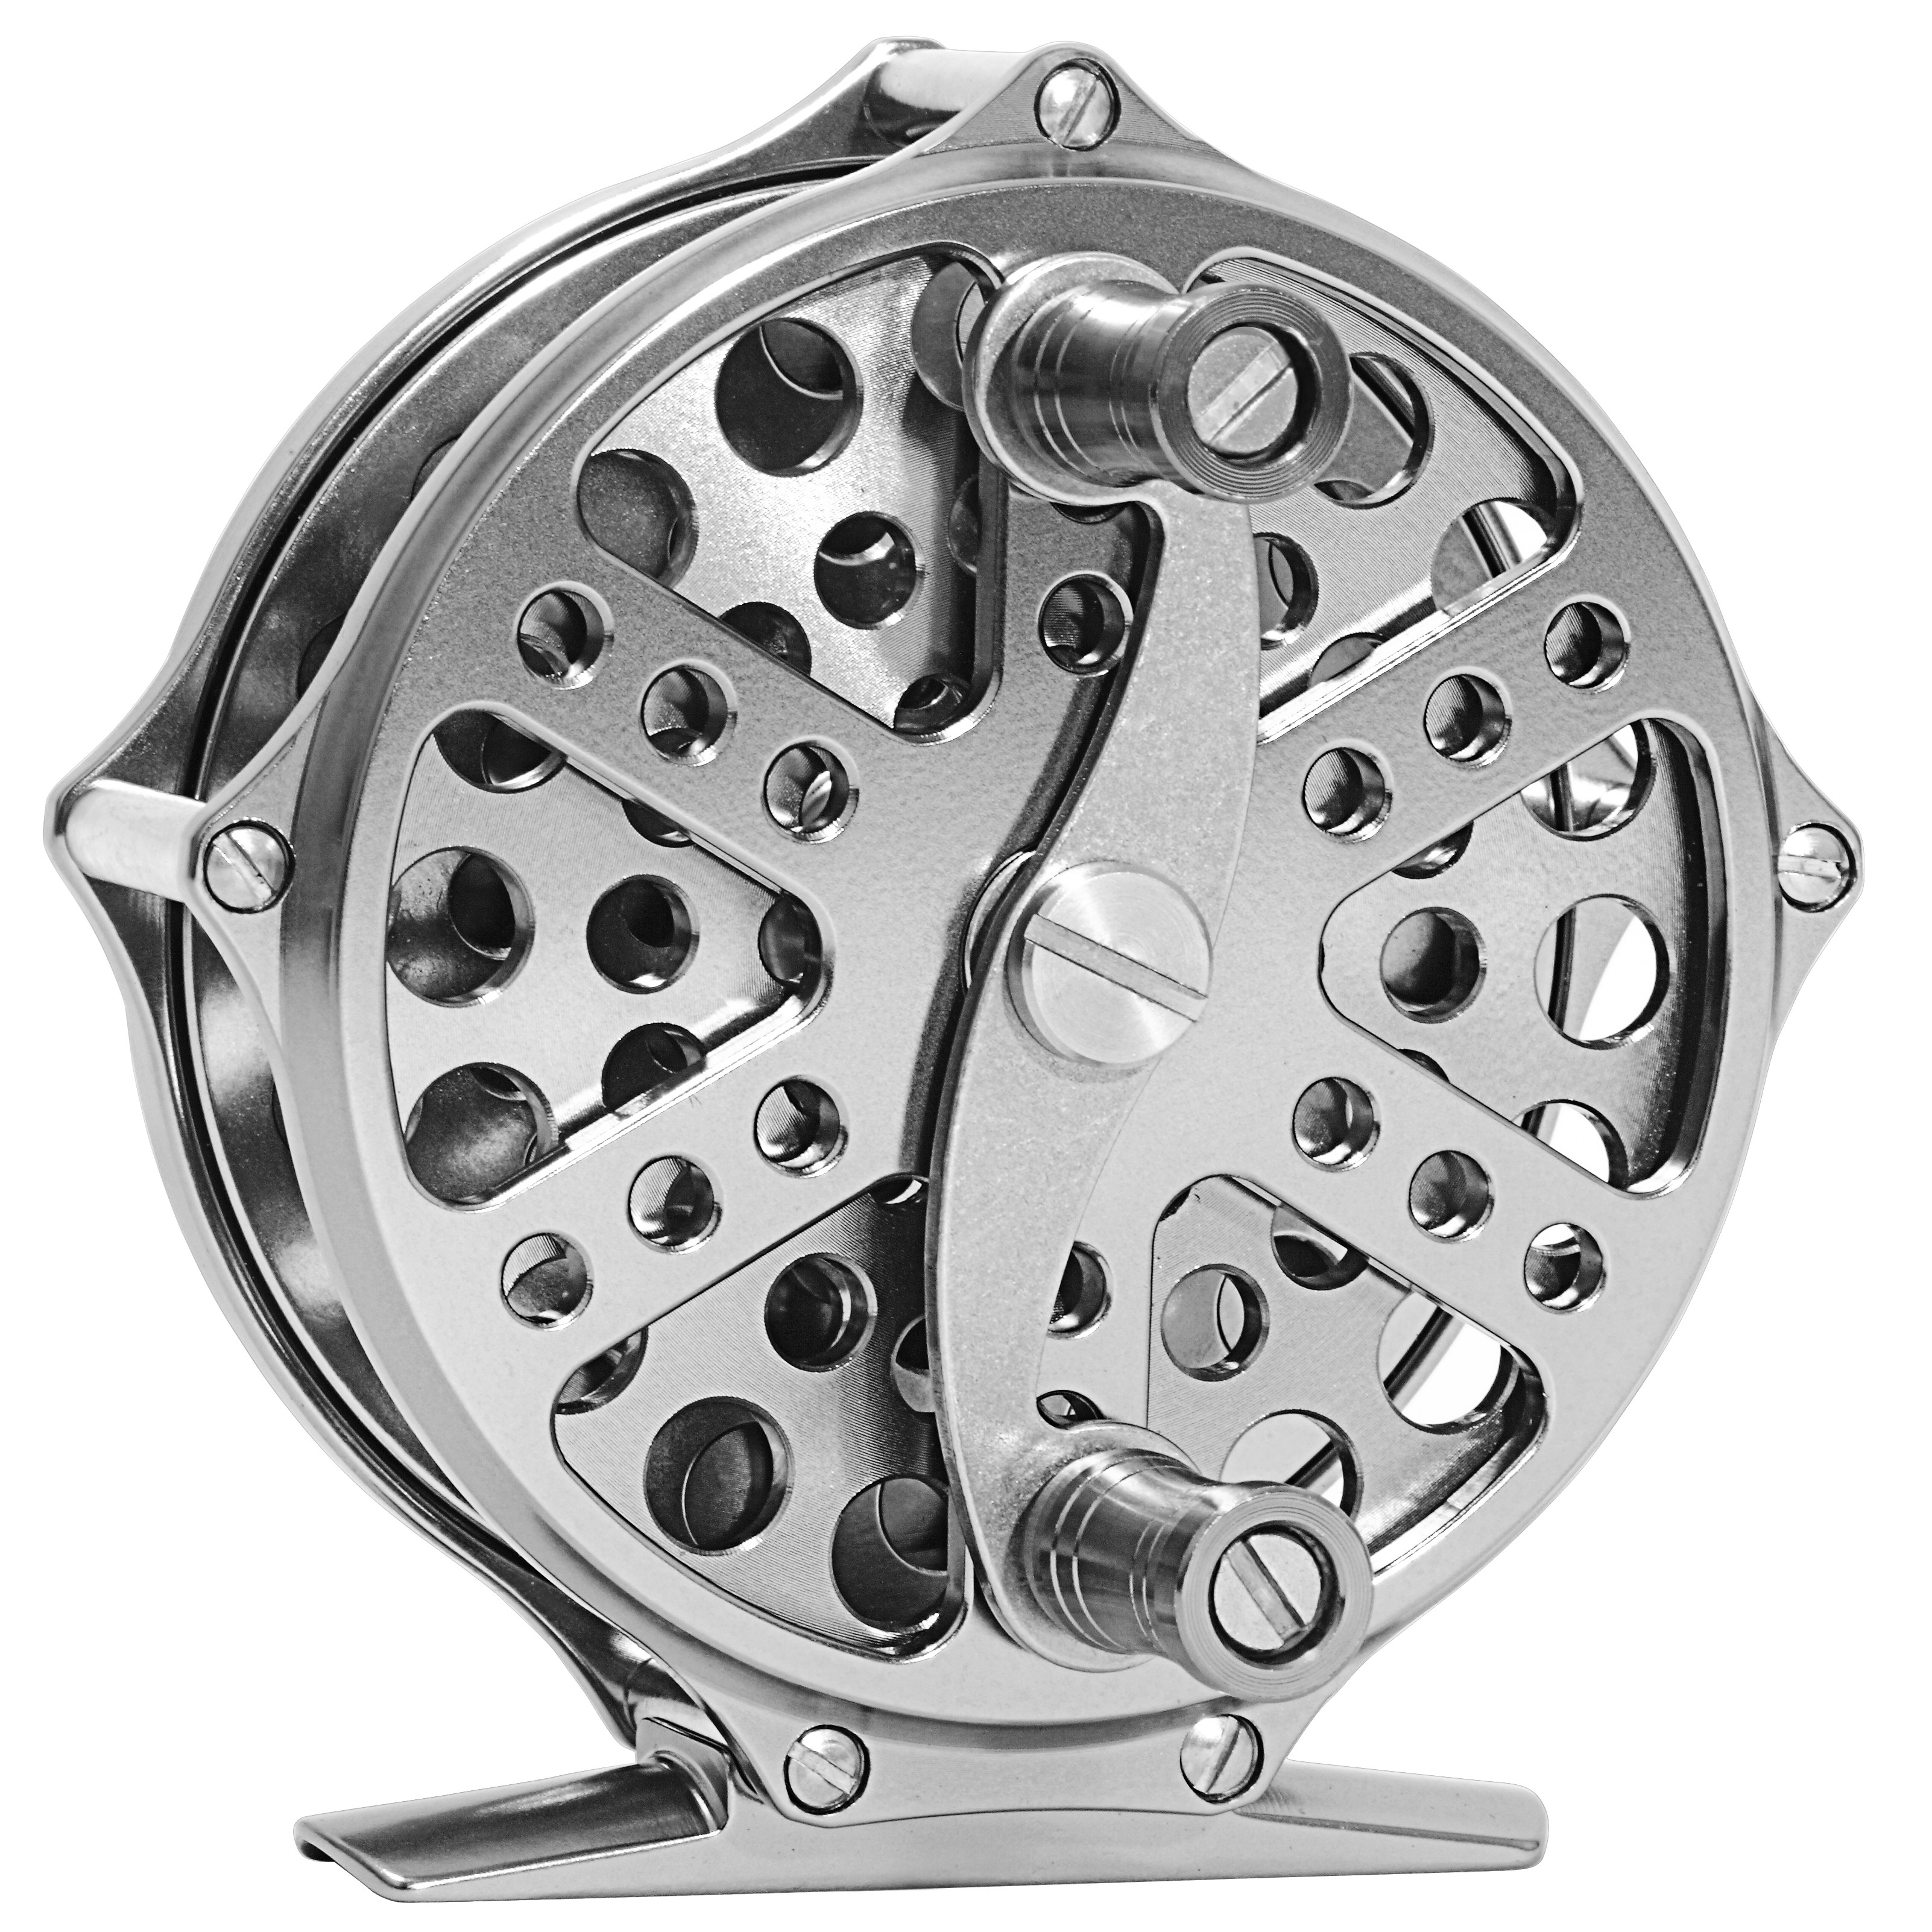 Cnc Machined Aluminum Fly Fishing Reel For Freshwater Trout Lake